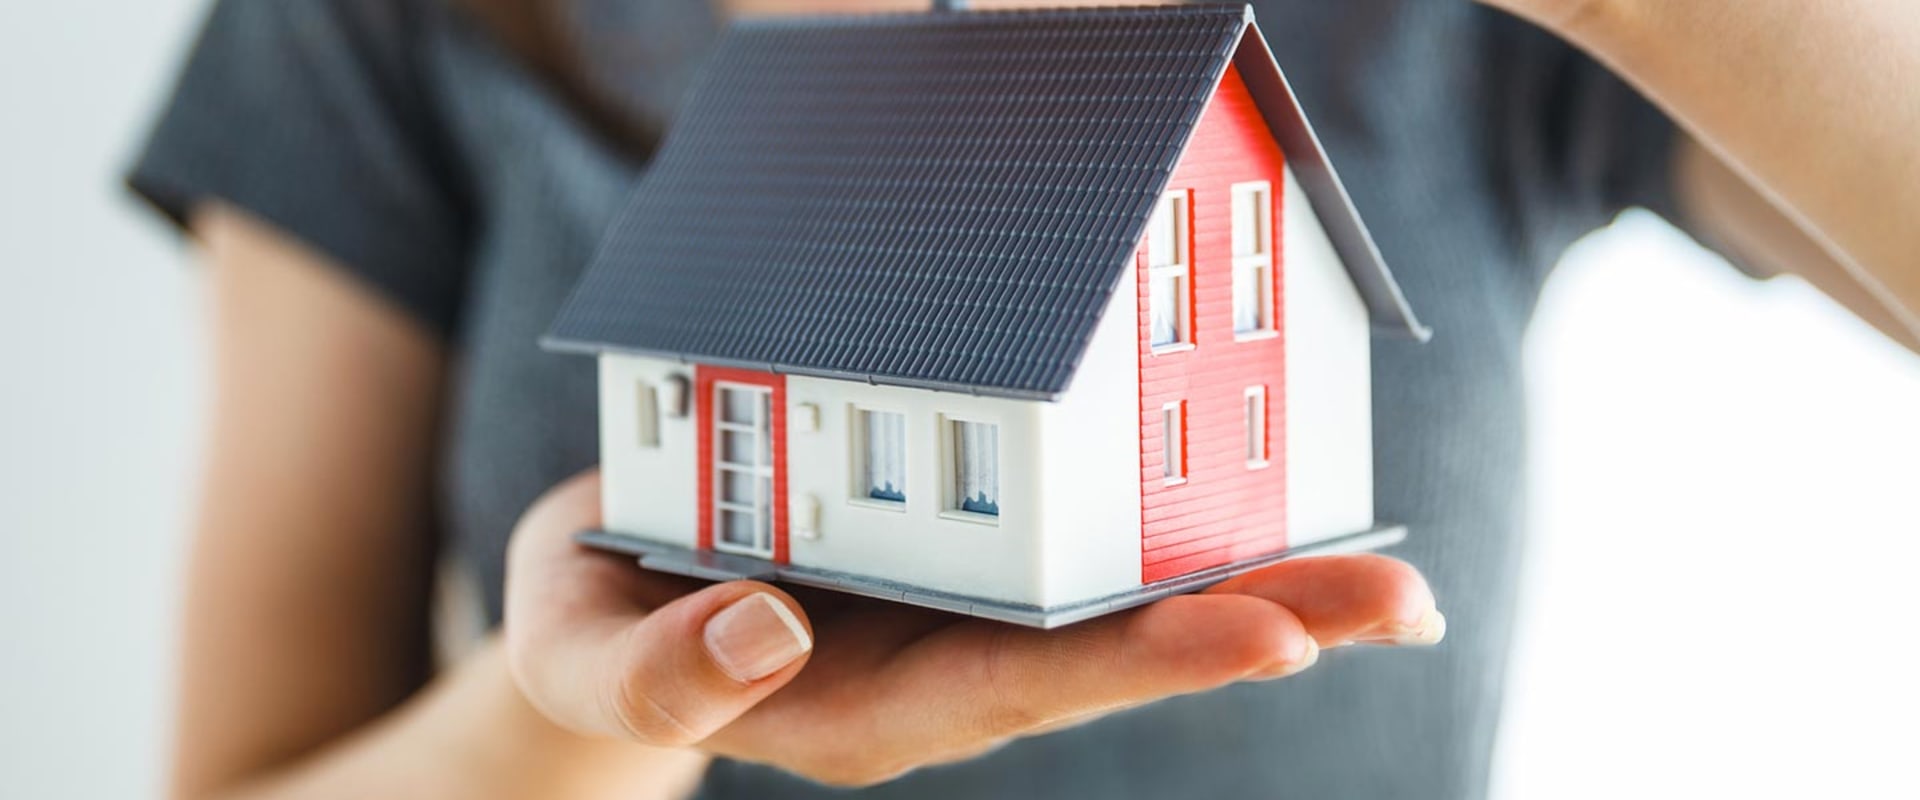 Dwelling Coverage: What You Need to Know